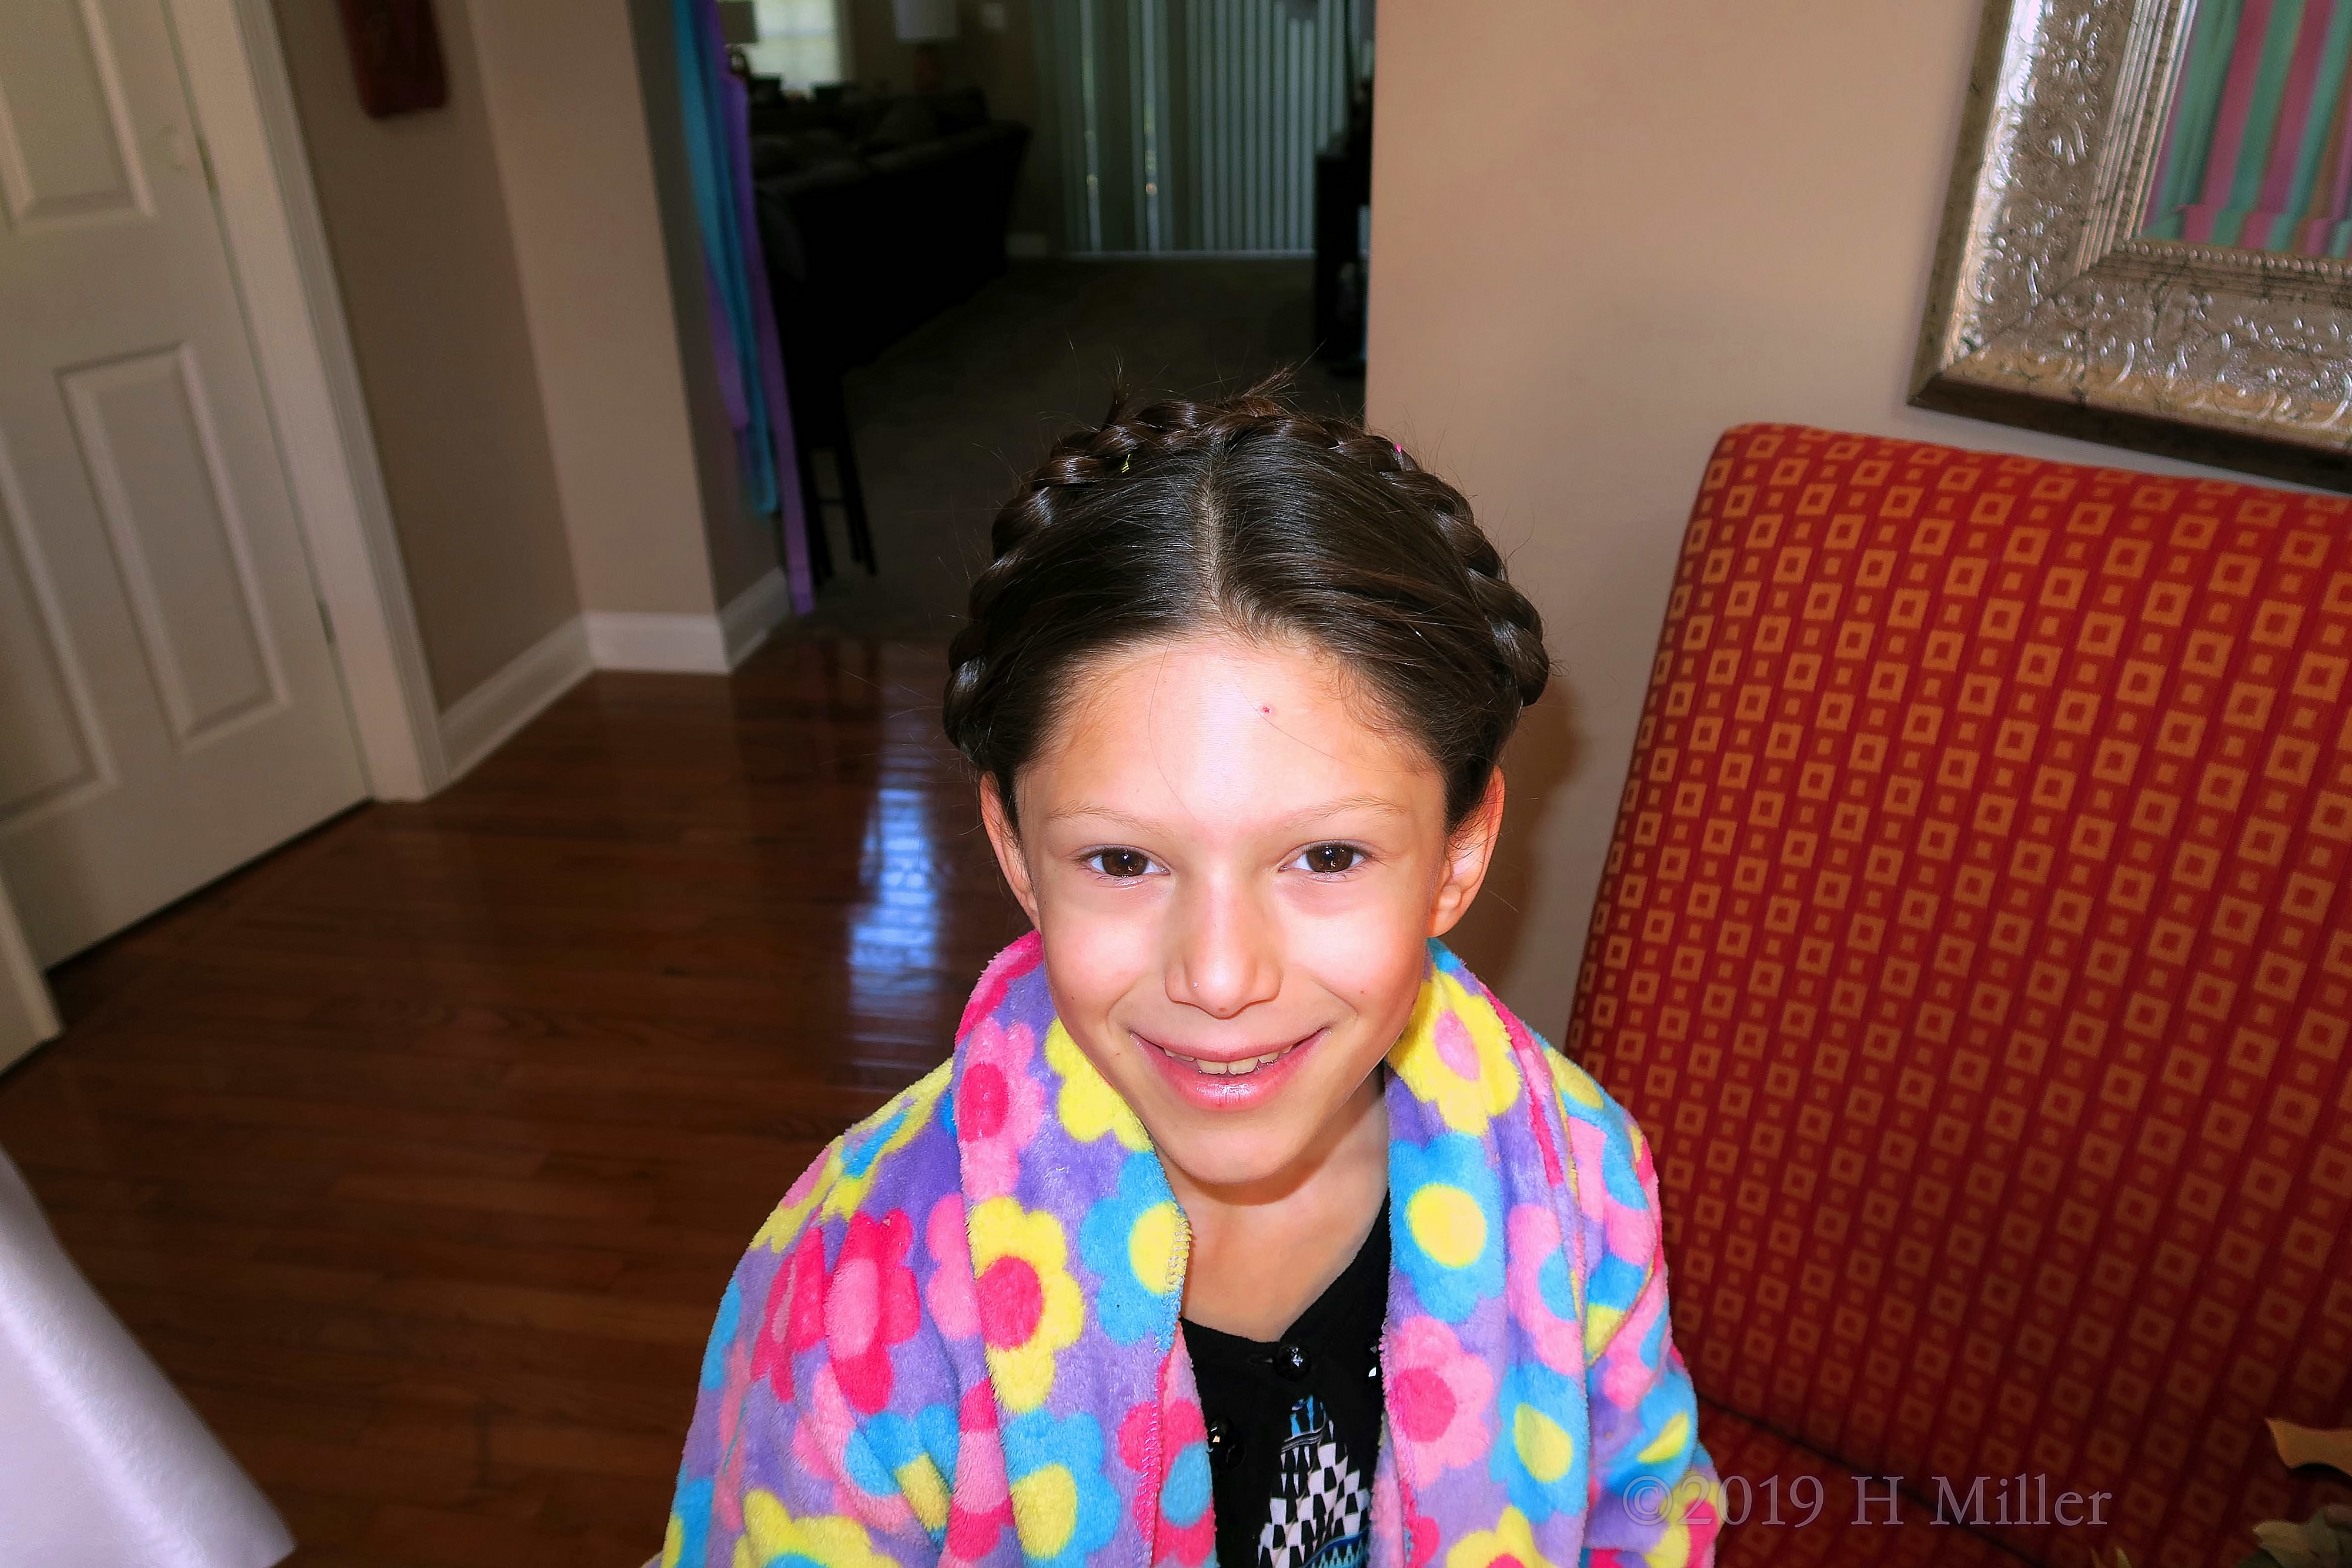 Really Royal! Kids Hairstyle Braided Crown On Spa Party Guest! 4